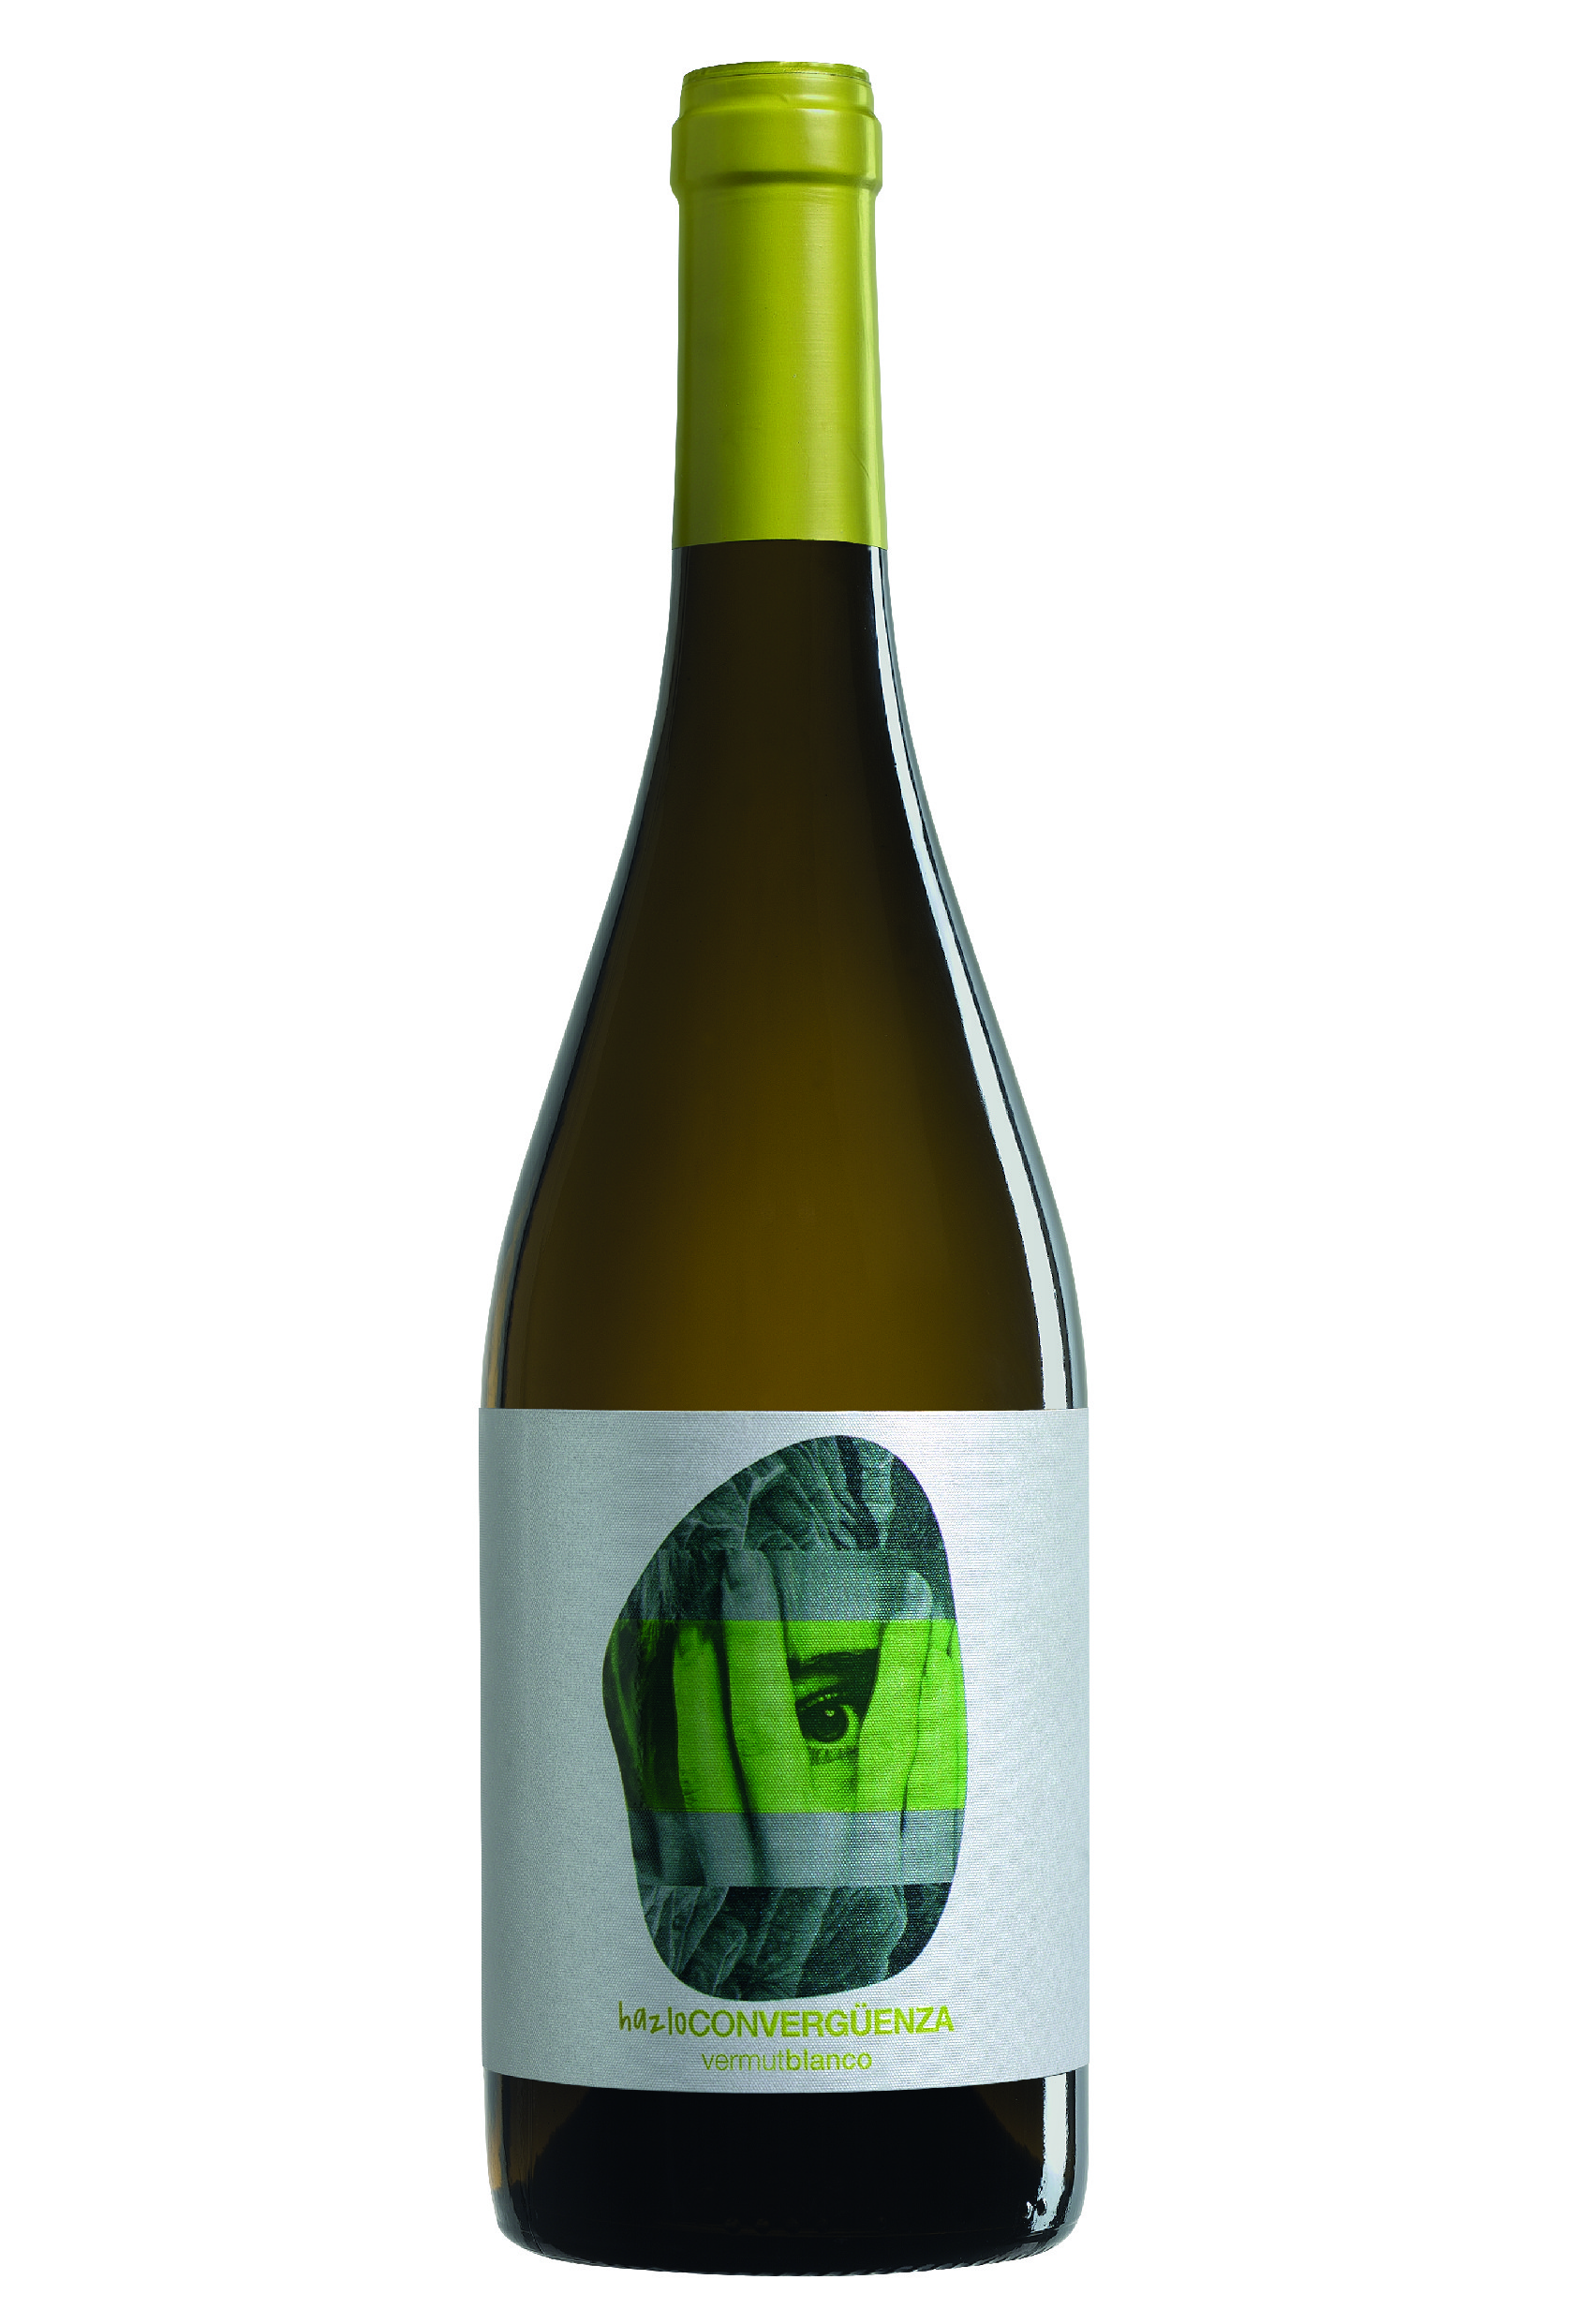 Wine Labelling that Play with Letter, Typography and Photomontage